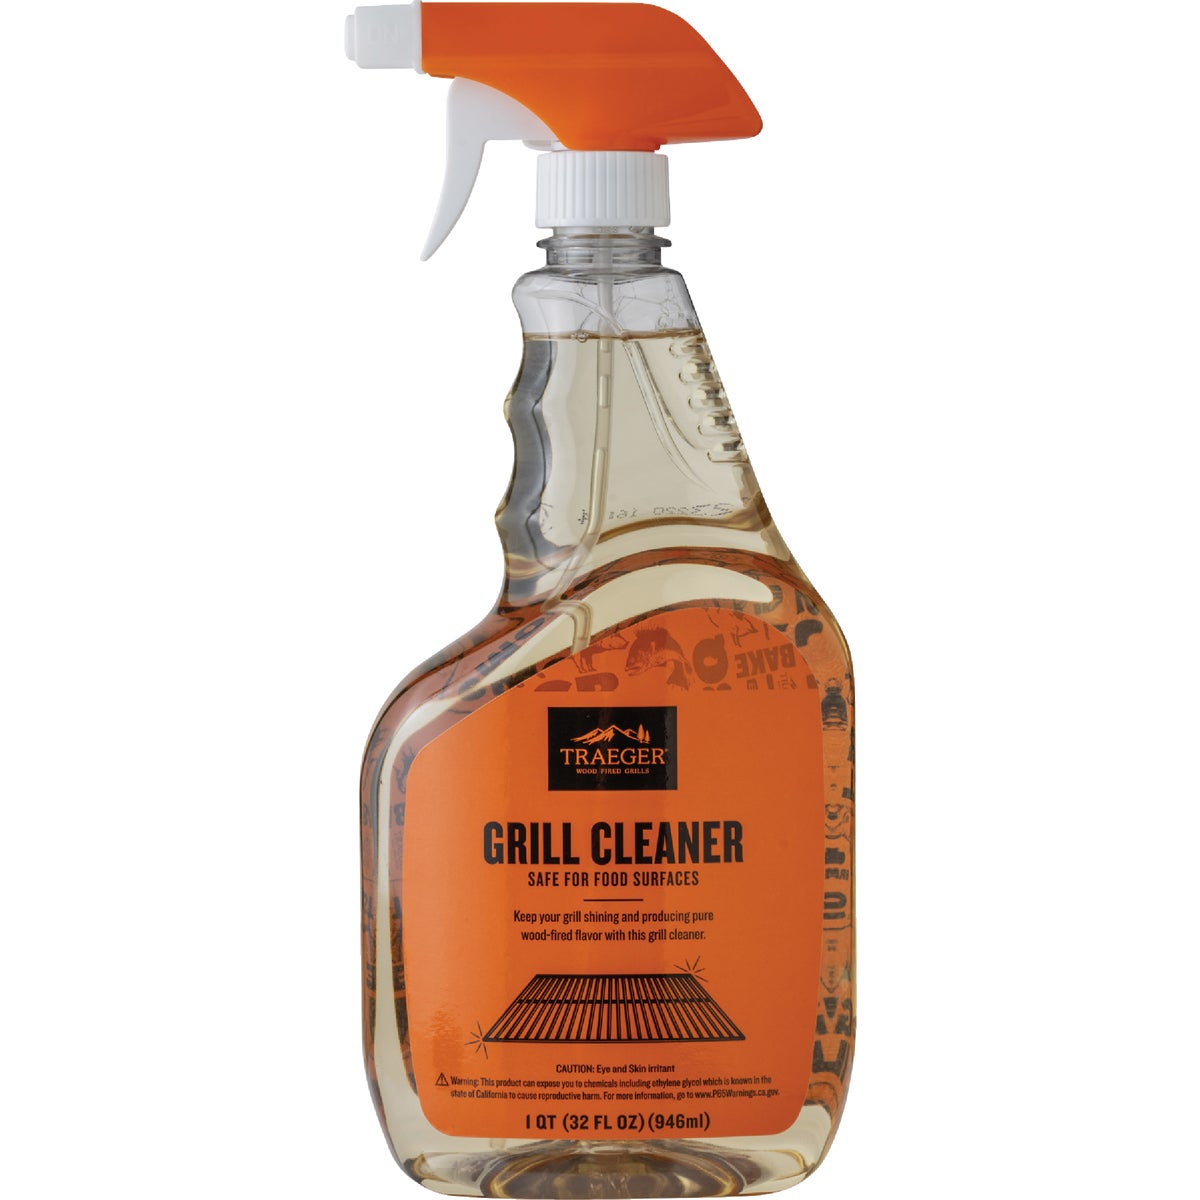 Item 800285, Grill cleaner specifically developed for Traeger Grills and accessories.